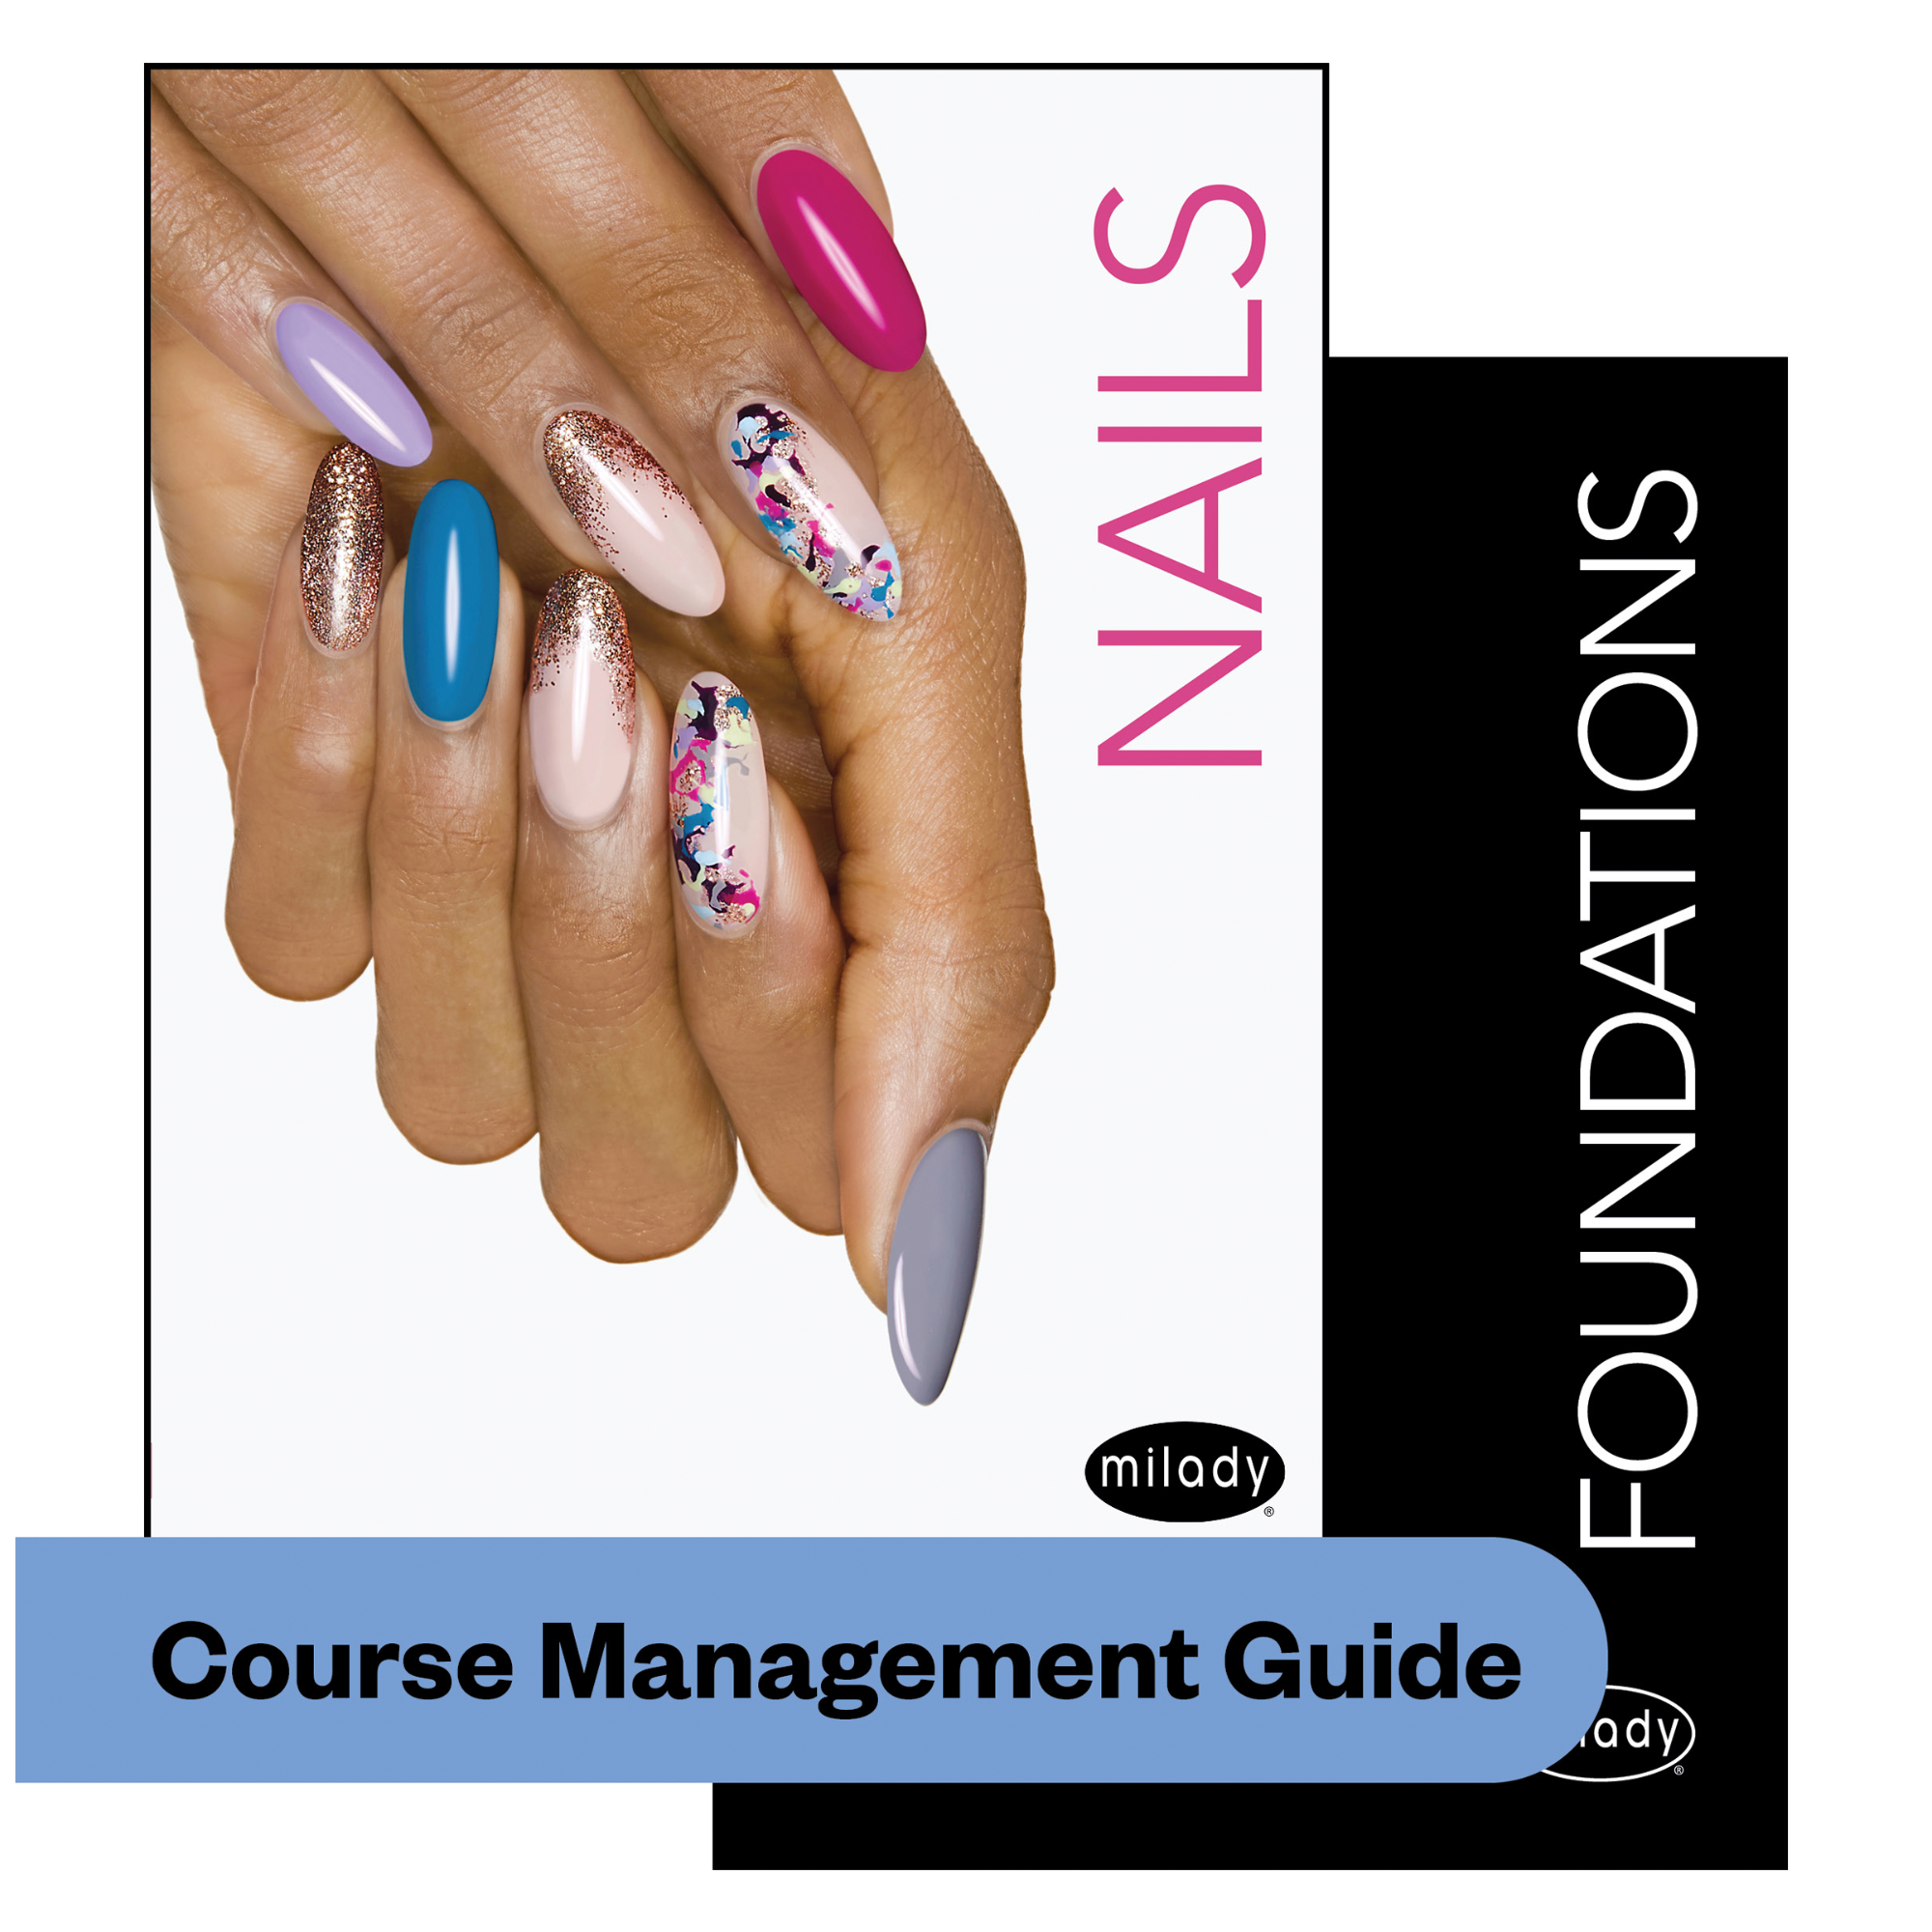 Standard Nail 8E & Foundations Course Management Guide Package on USB